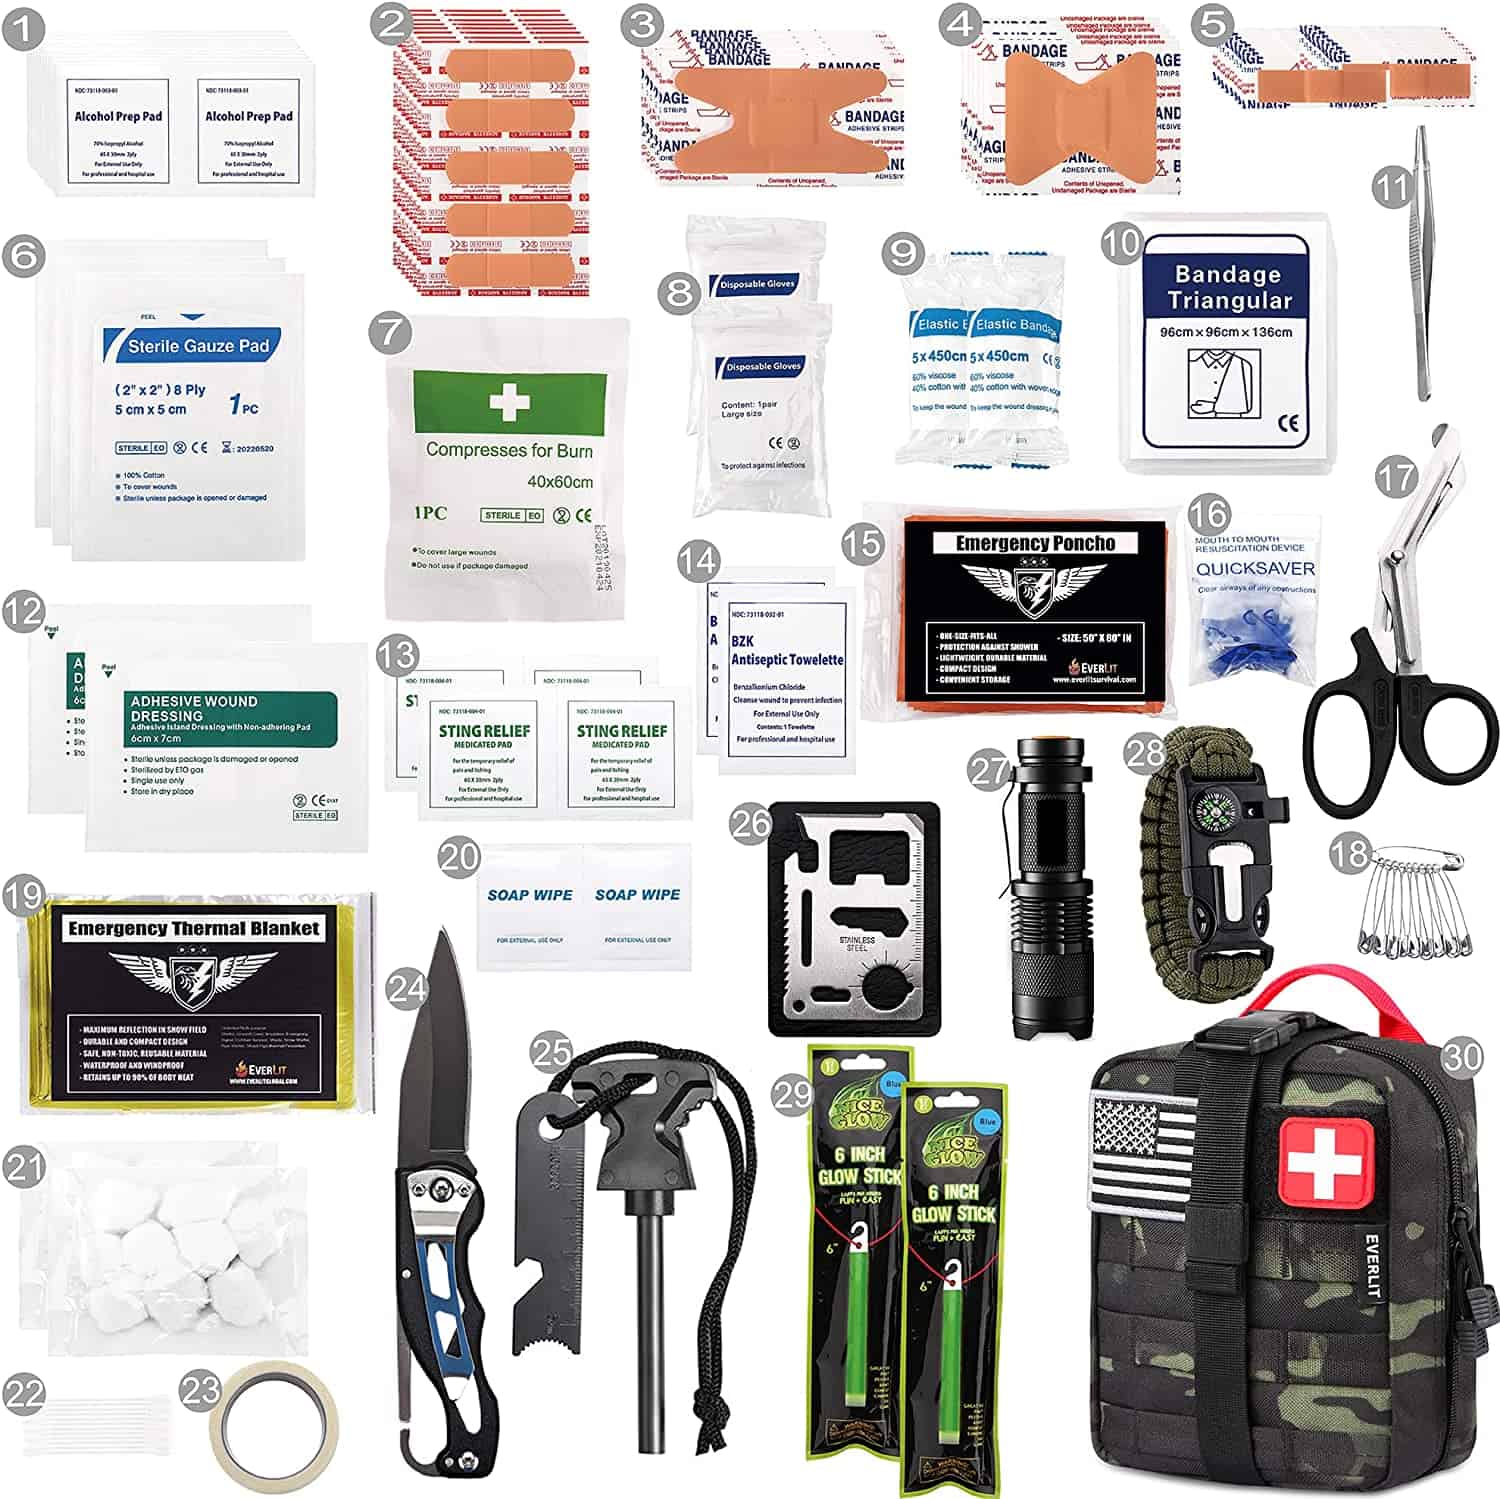 Black Camo Survival First Aid Kit Contains Contains 250 Piece First Aid Kit - 1 